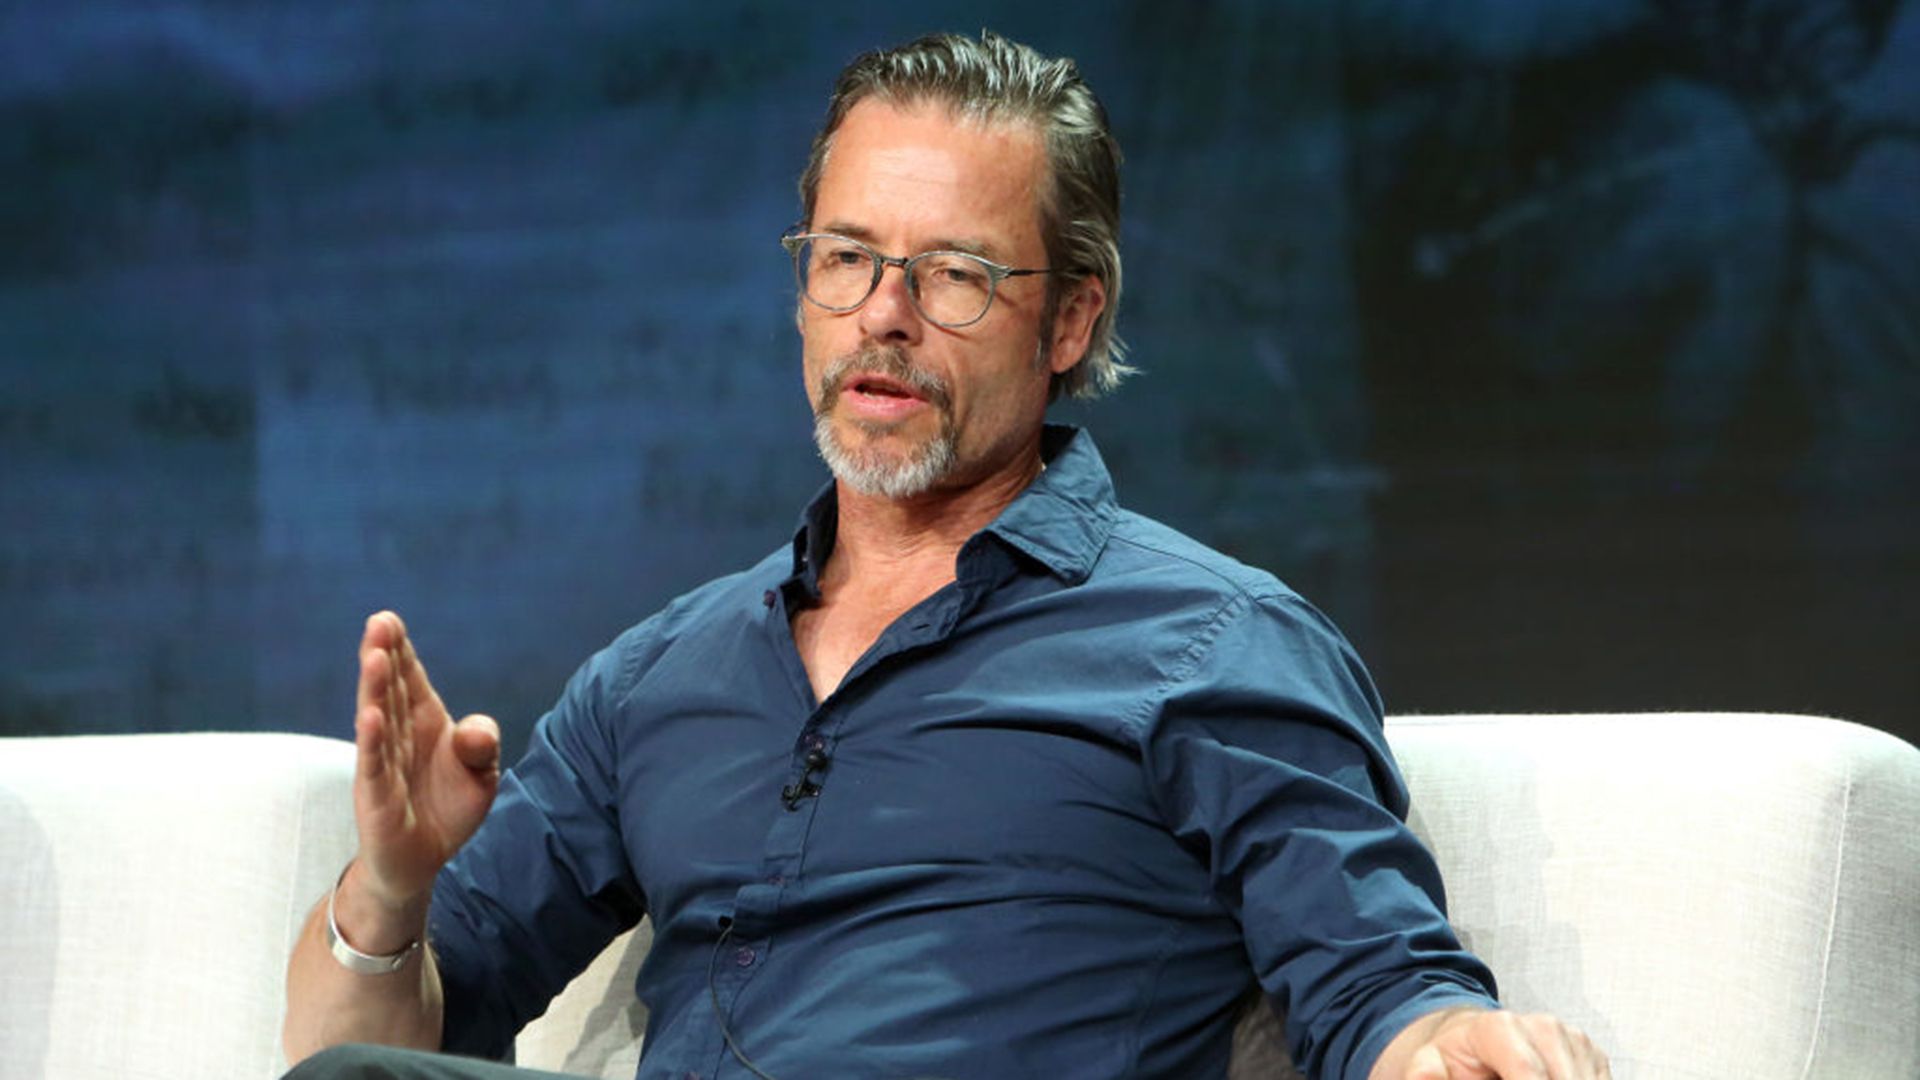 Guy Pearce talking on a TV panel in 2018